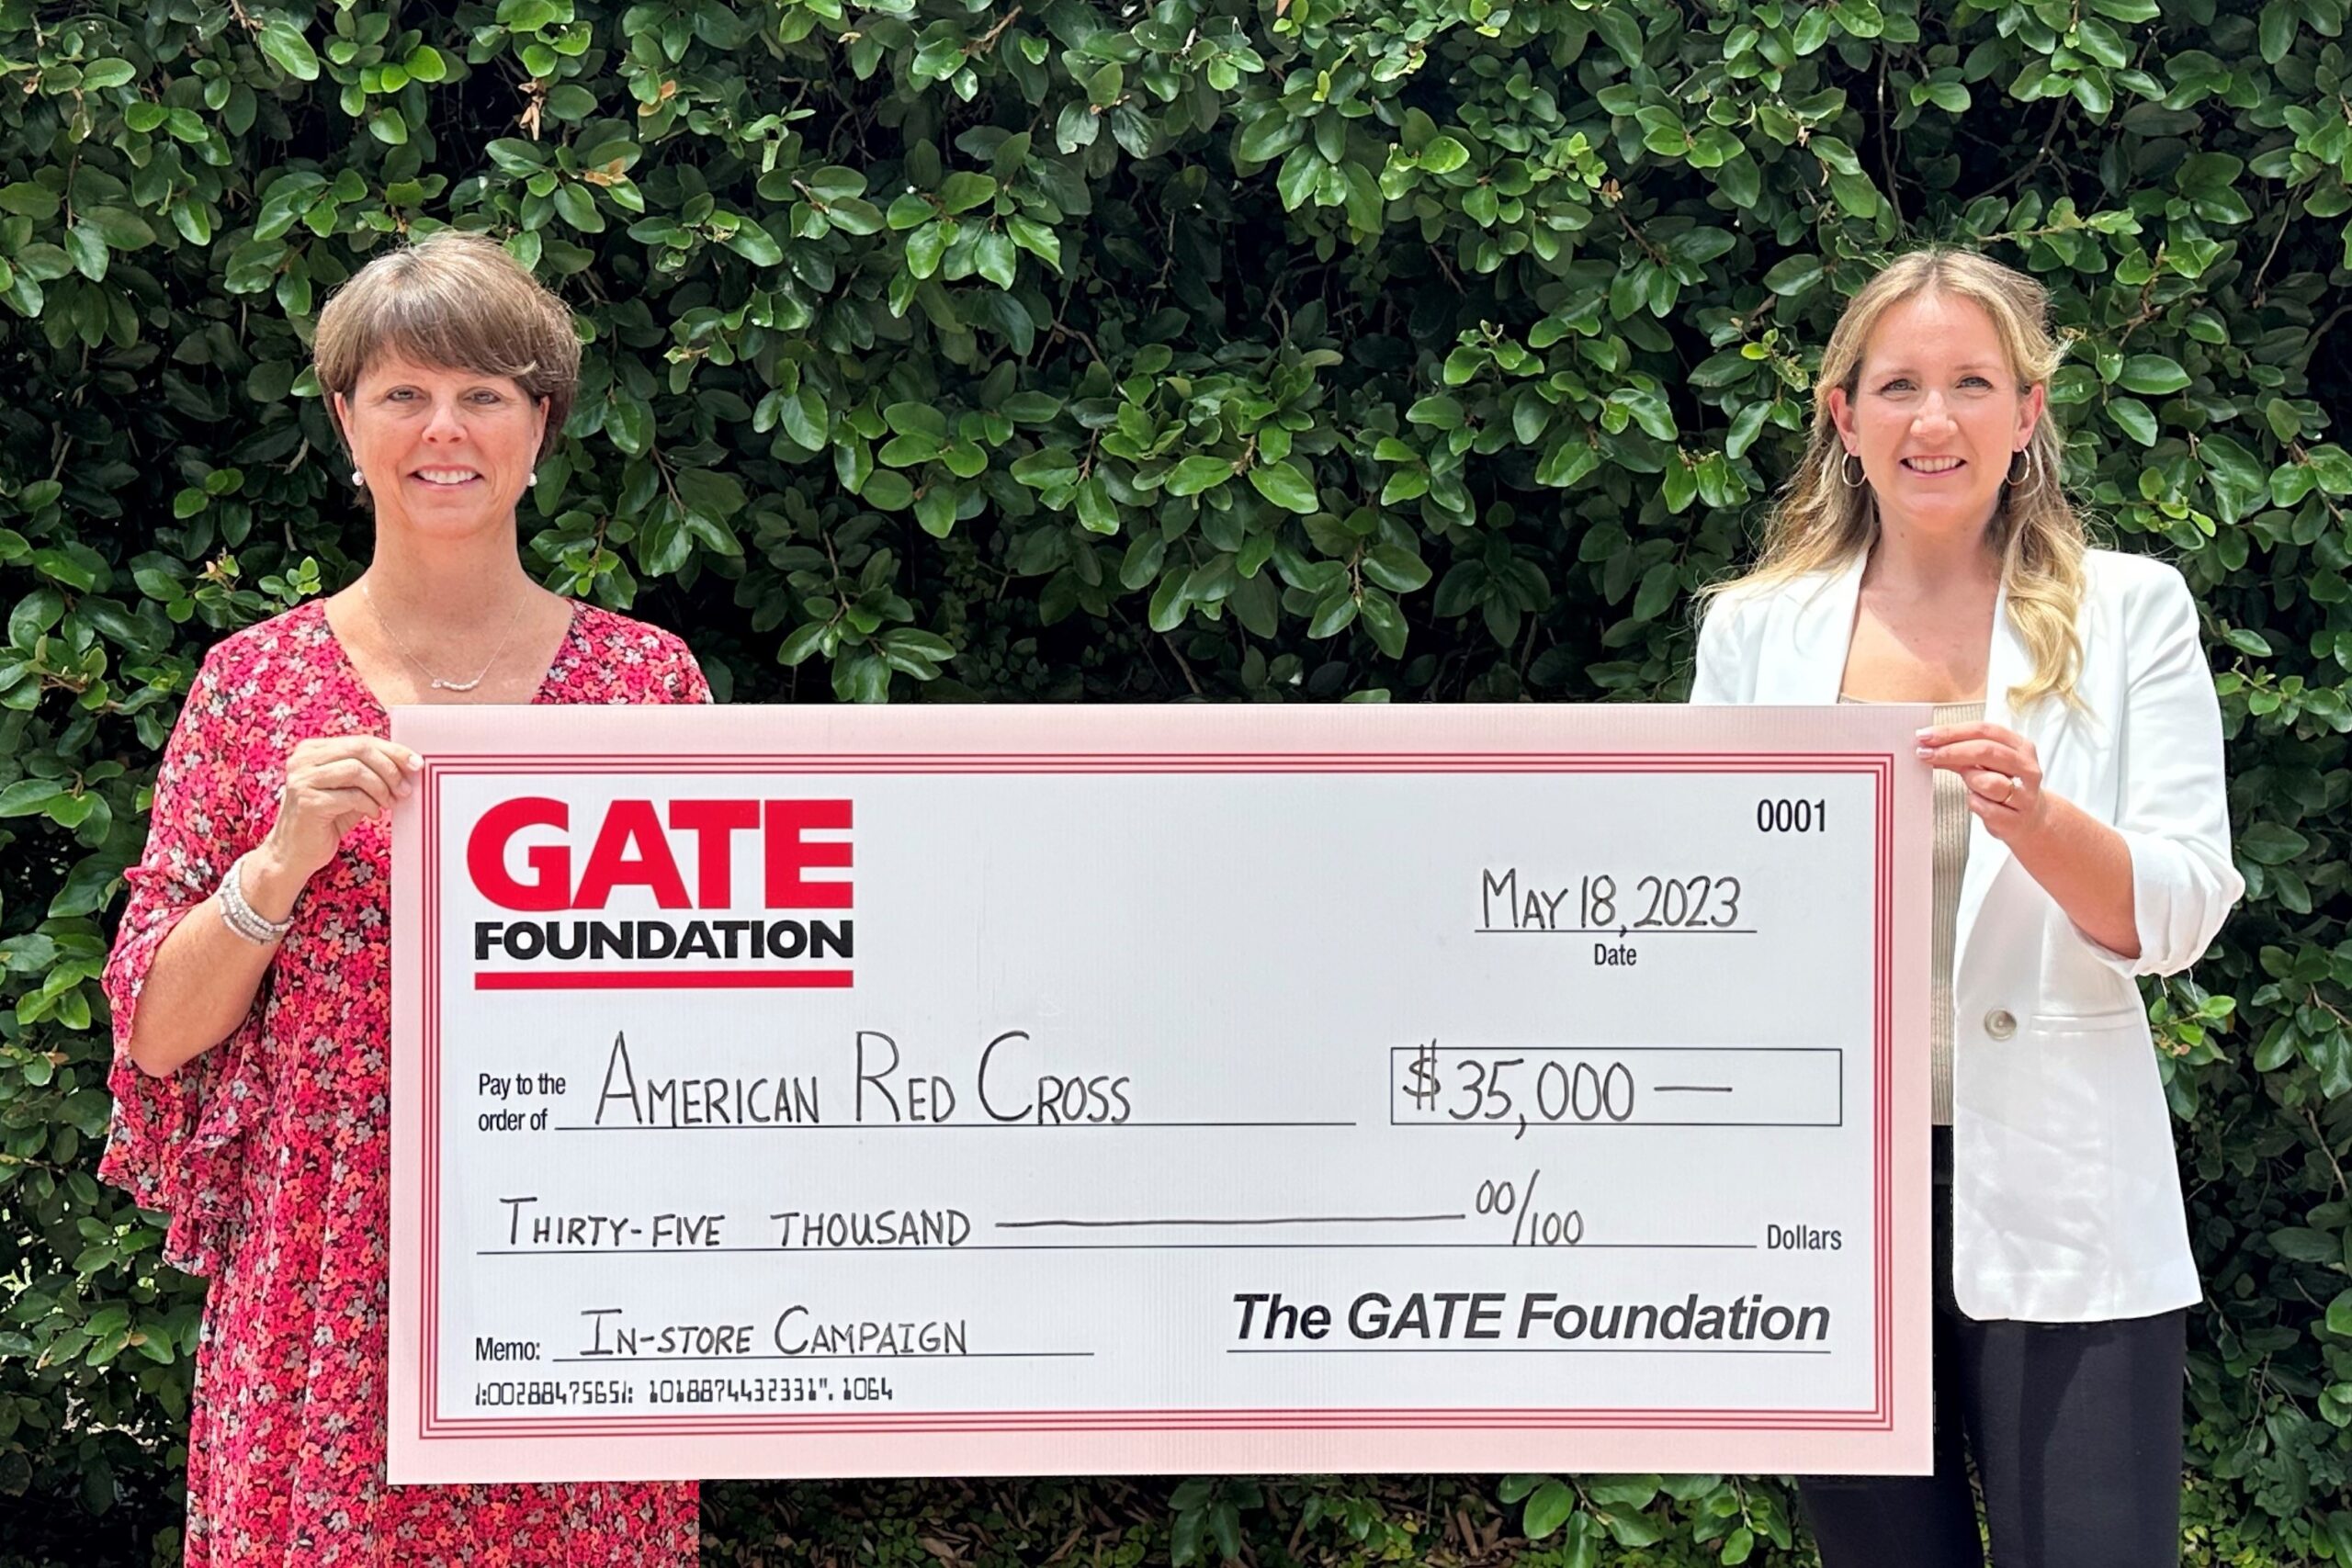 GATE STORES, FOUNDATION RAISE $35,000 FOR THE AMERICAN RED CROSS